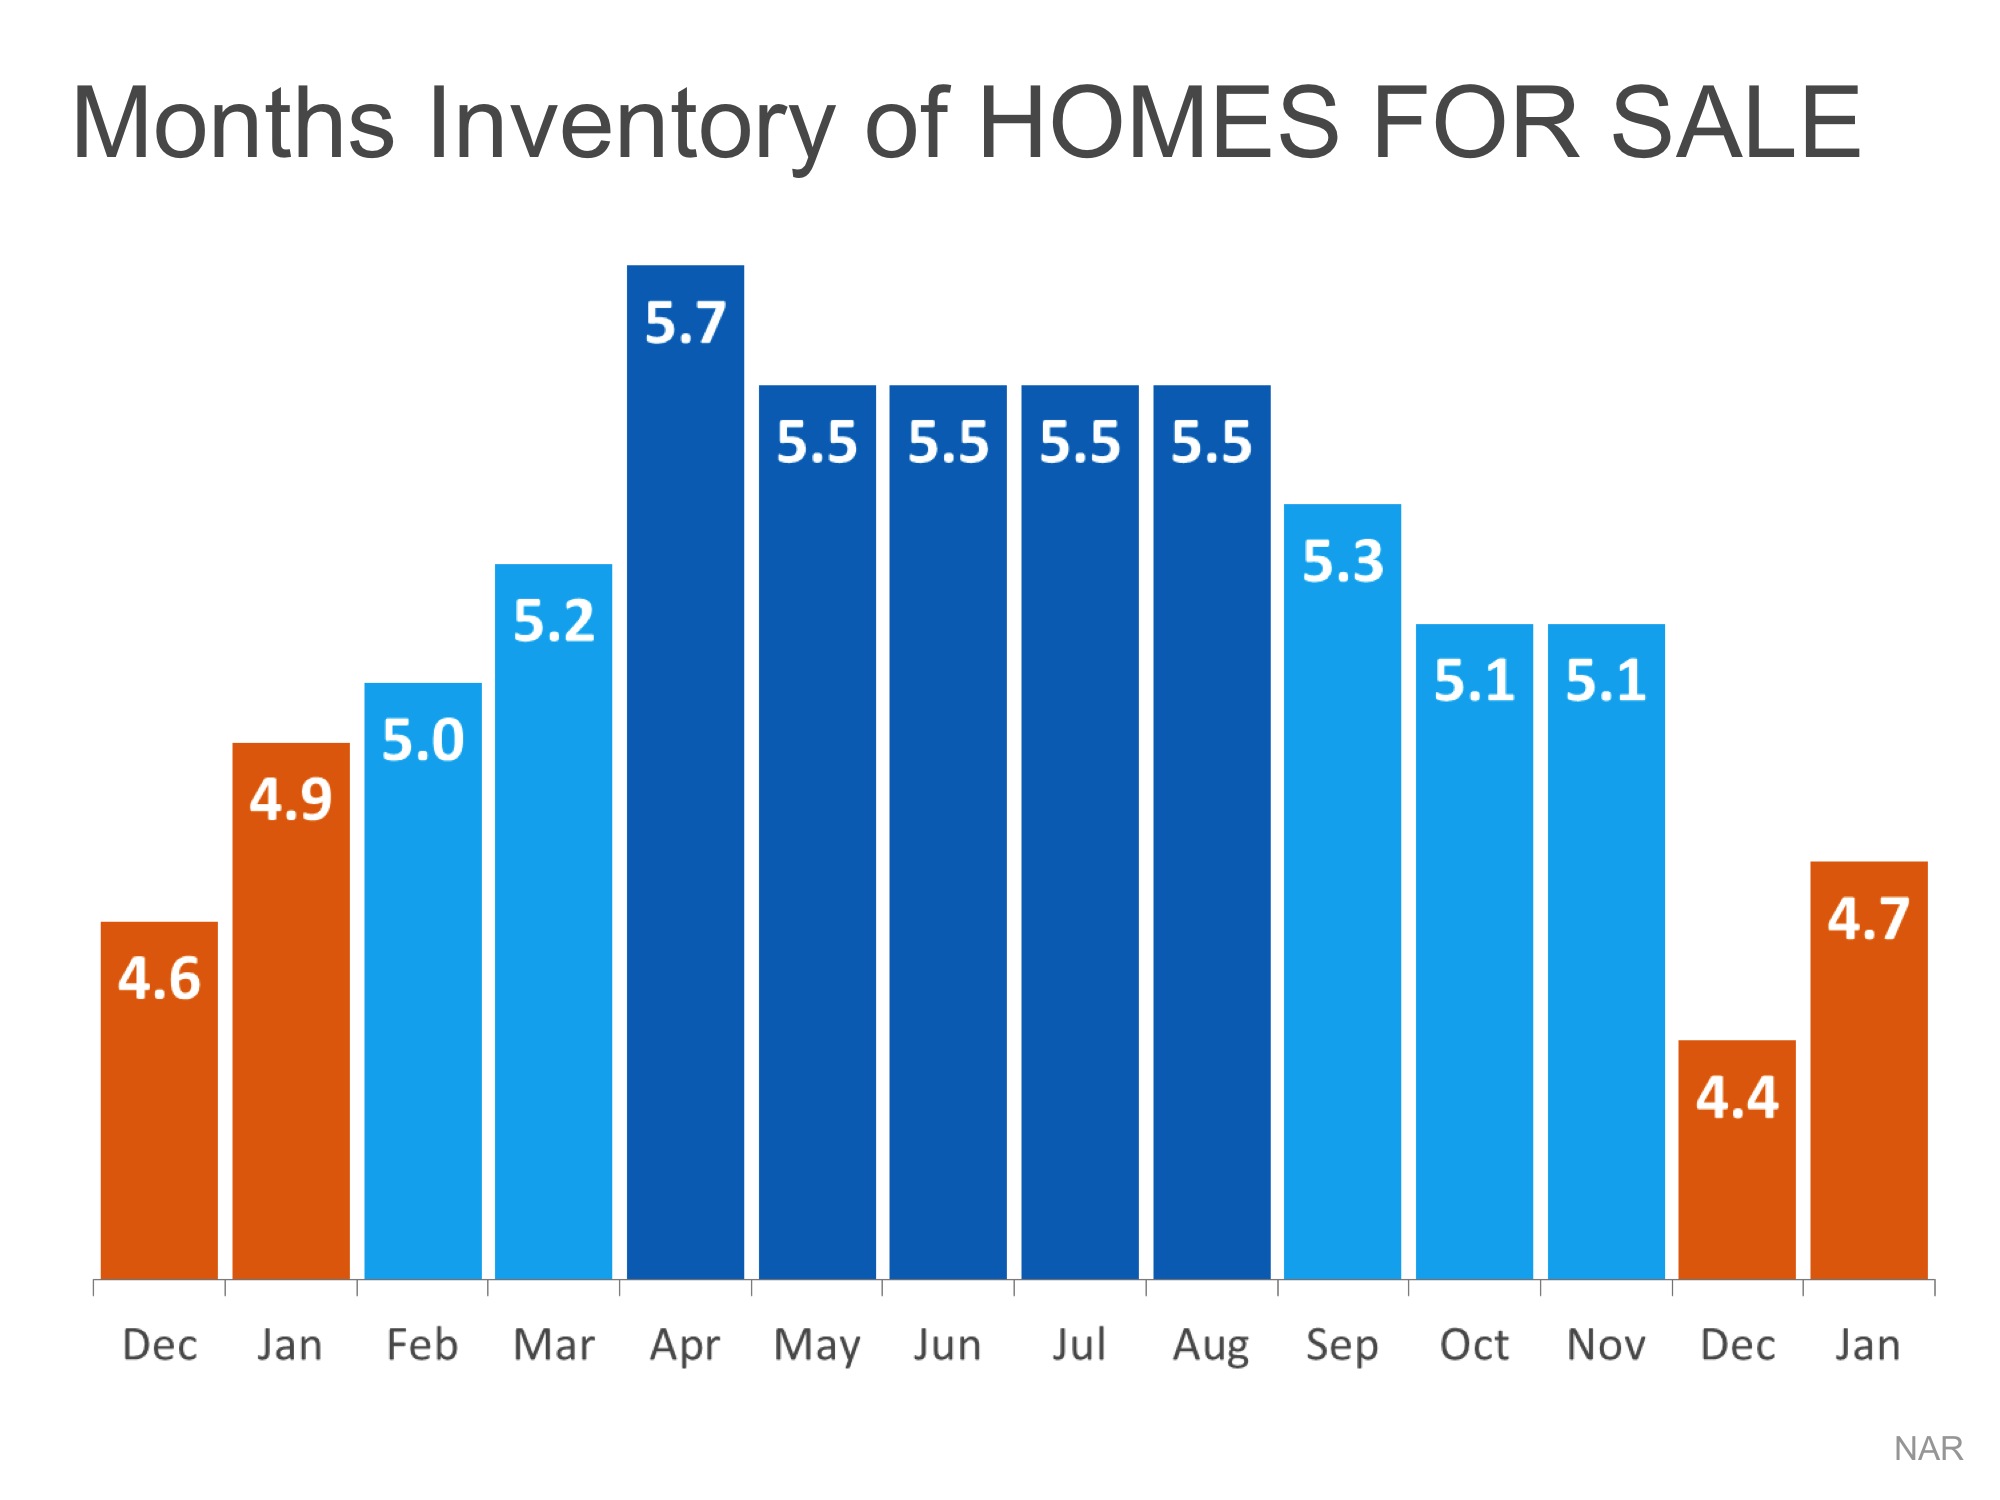 Months Inventory Homes For Sale | Keeping Current Matters